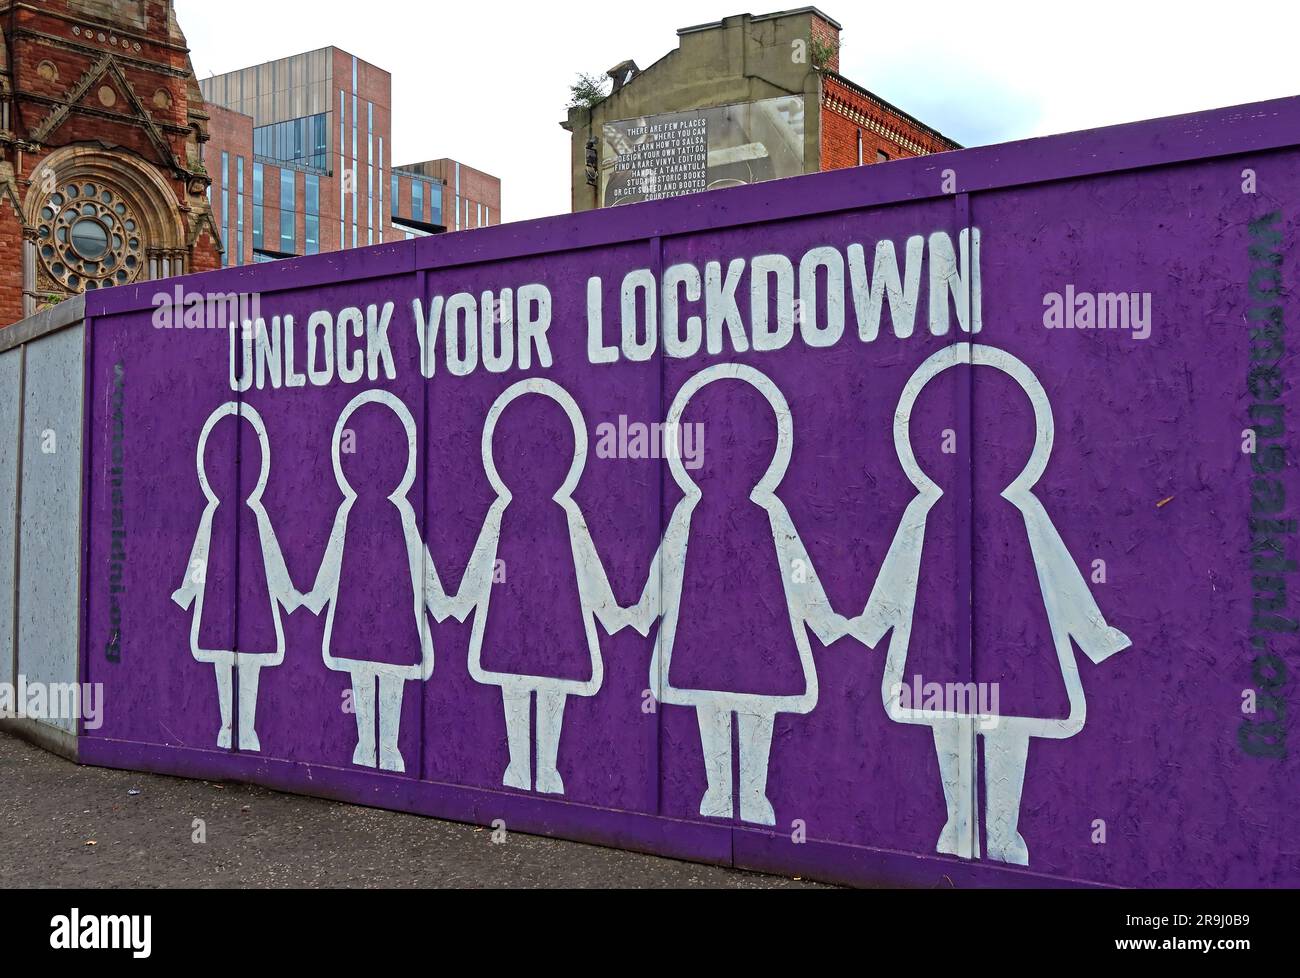 Women's Aid Federation Northern Ireland, Unlock Your Lockdown Campaign, 57 Carrick Hill, Belfast, Irlande du Nord, Royaume-Uni, BT1 2JH Banque D'Images